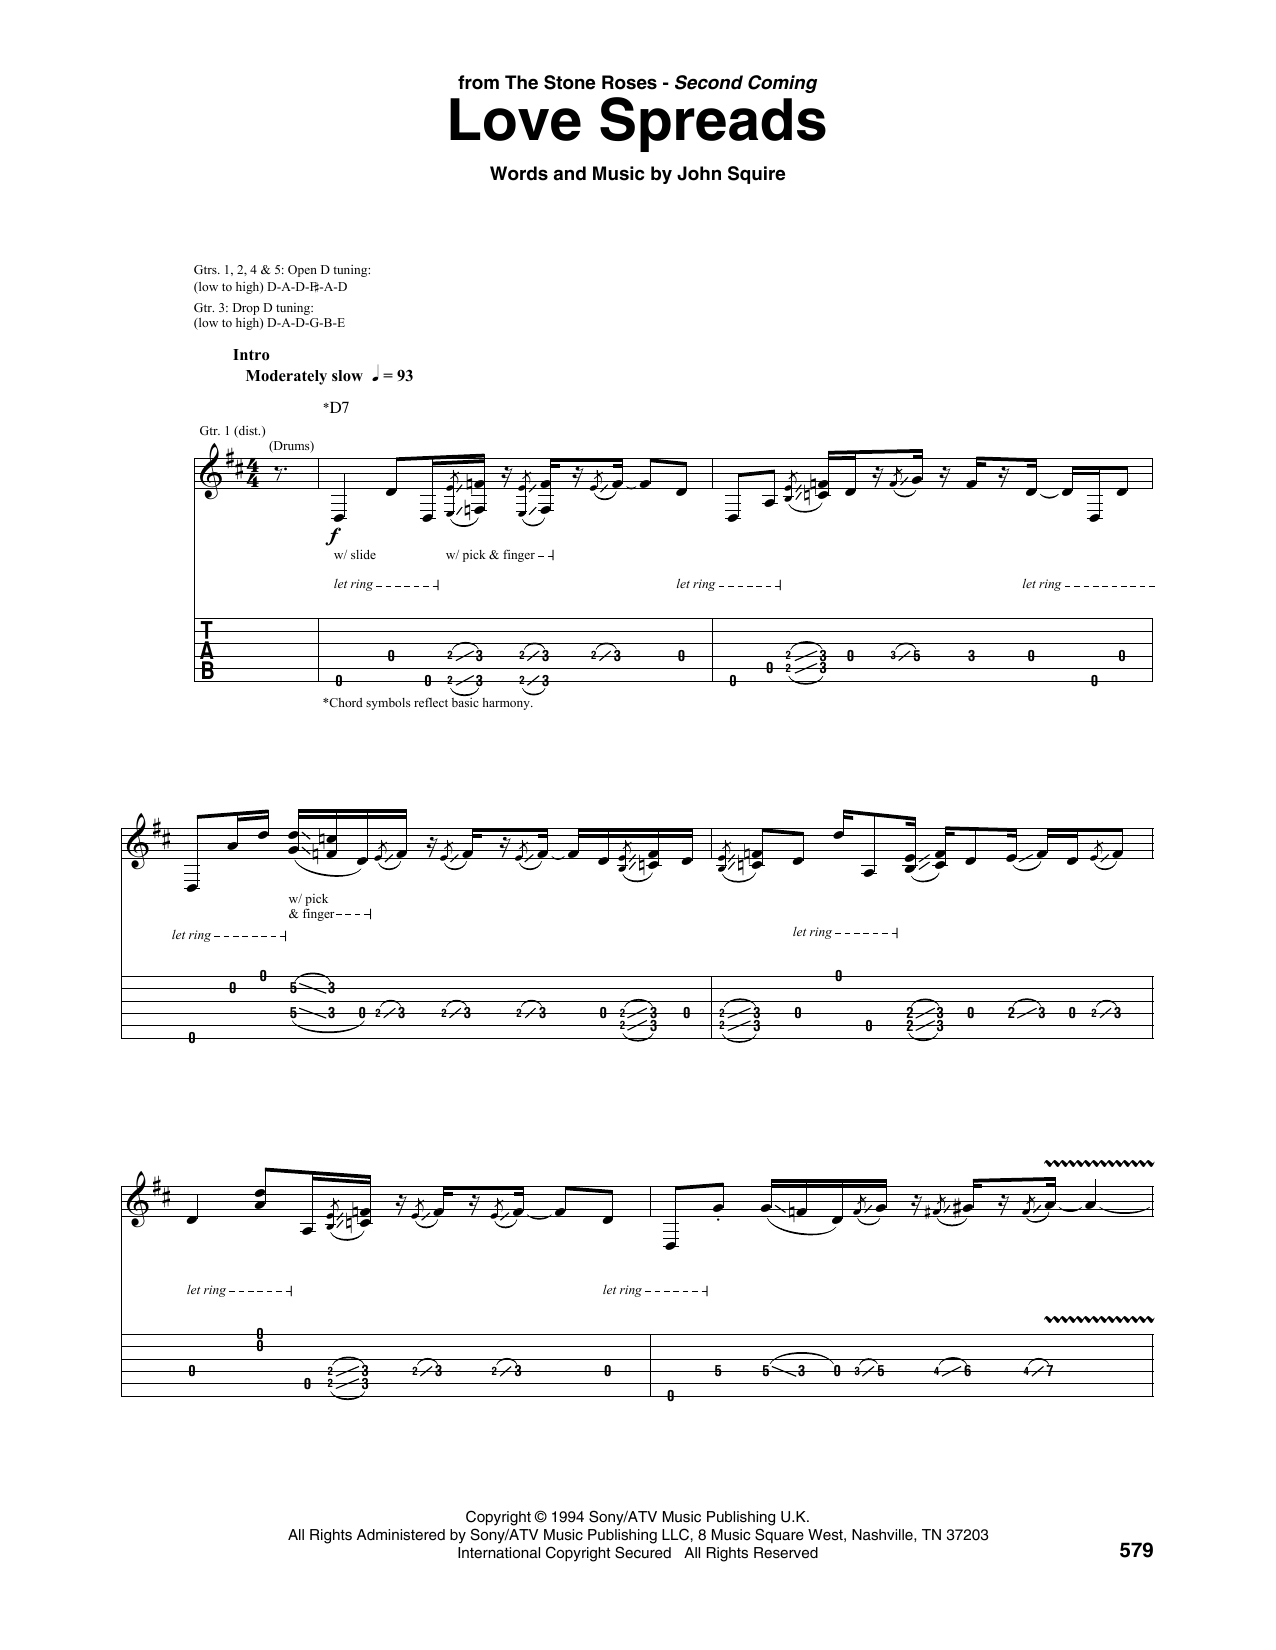 Download The Stone Roses Love Spreads Sheet Music